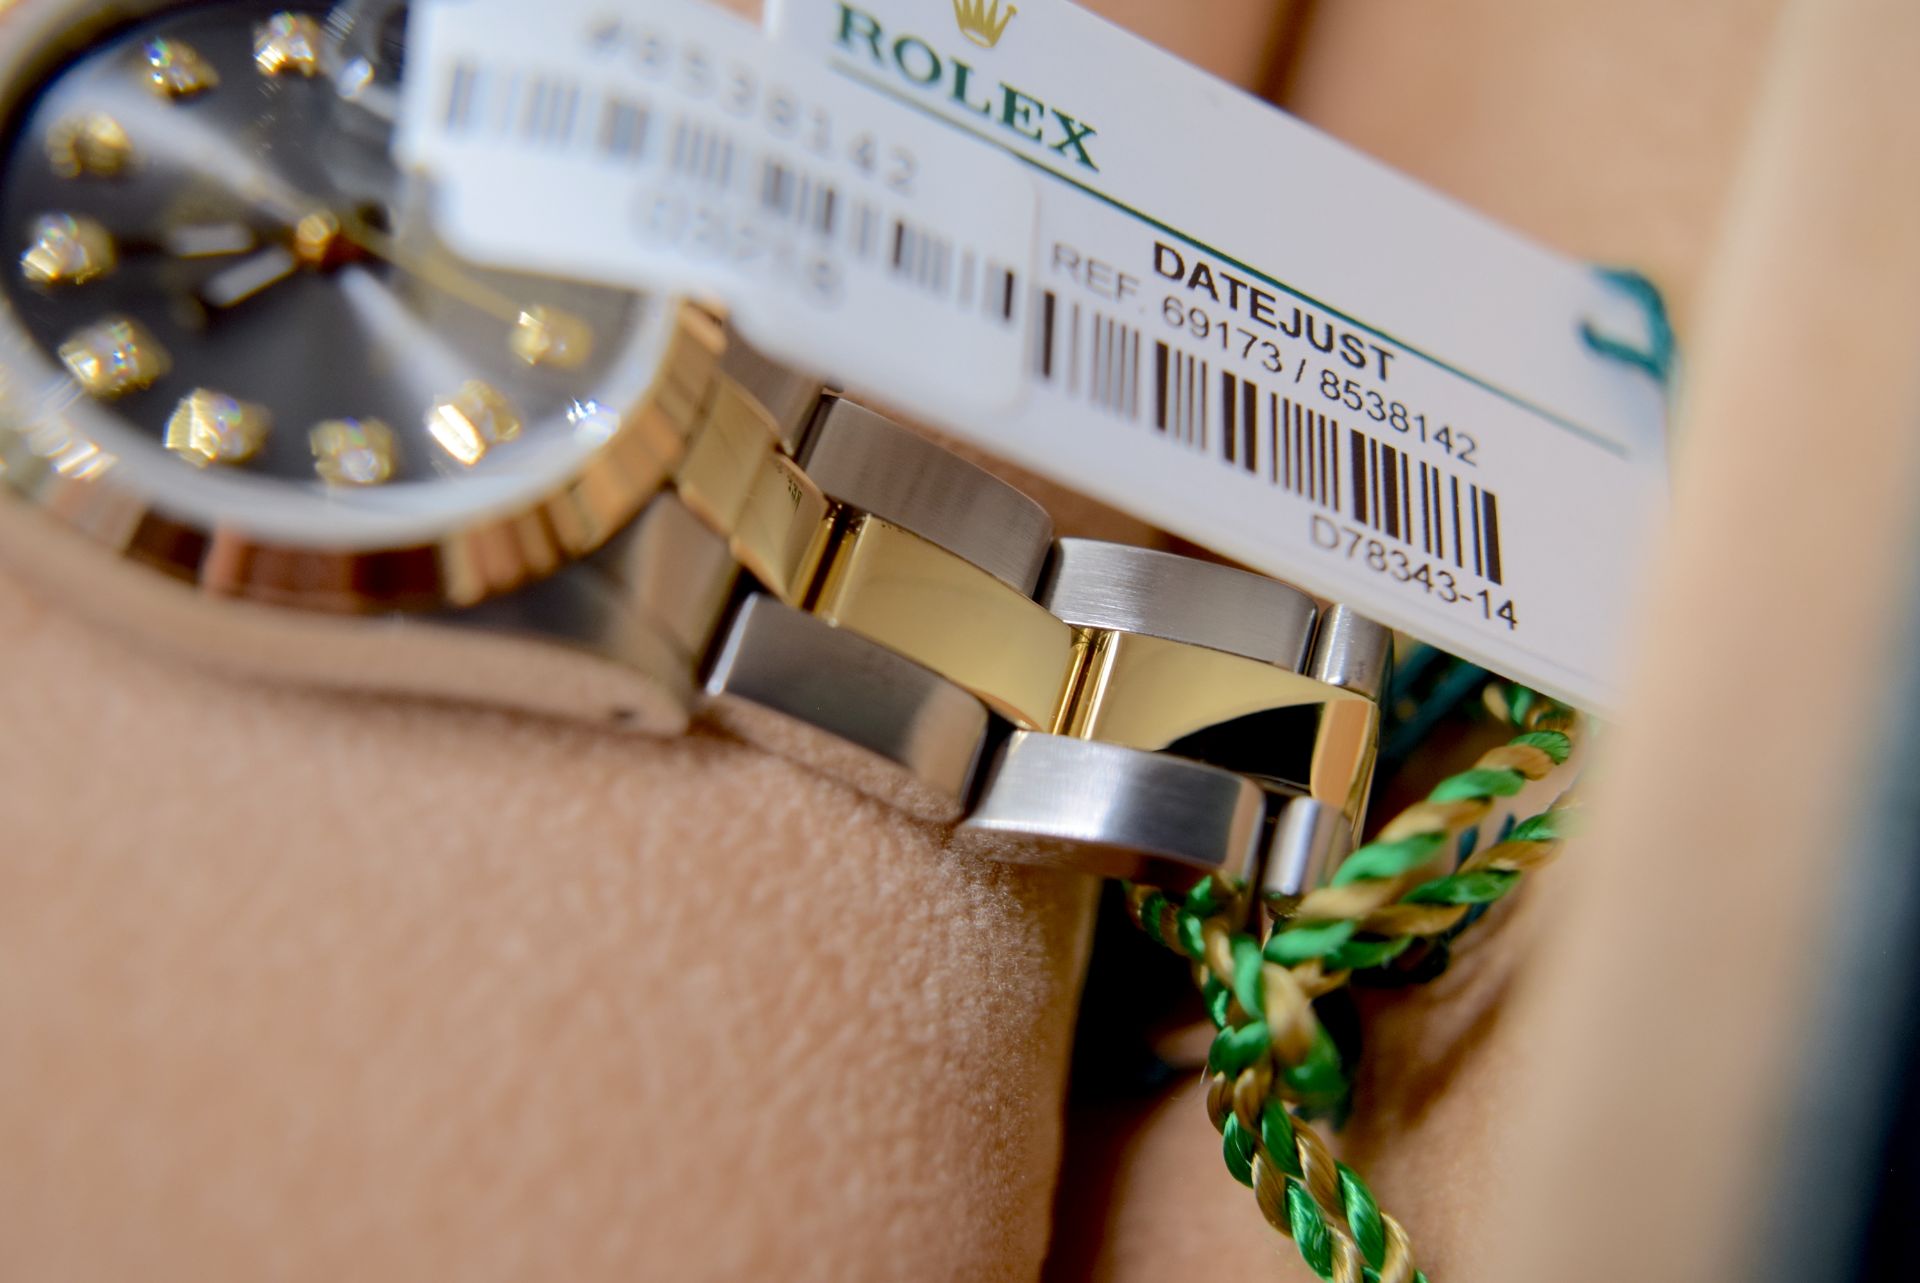 ROLEX DATEJUST GOLD & STEEL REF. 69173 - GREY DIAL/ OYSTER (BOX & CERTIFICATE ETC) - Image 11 of 13